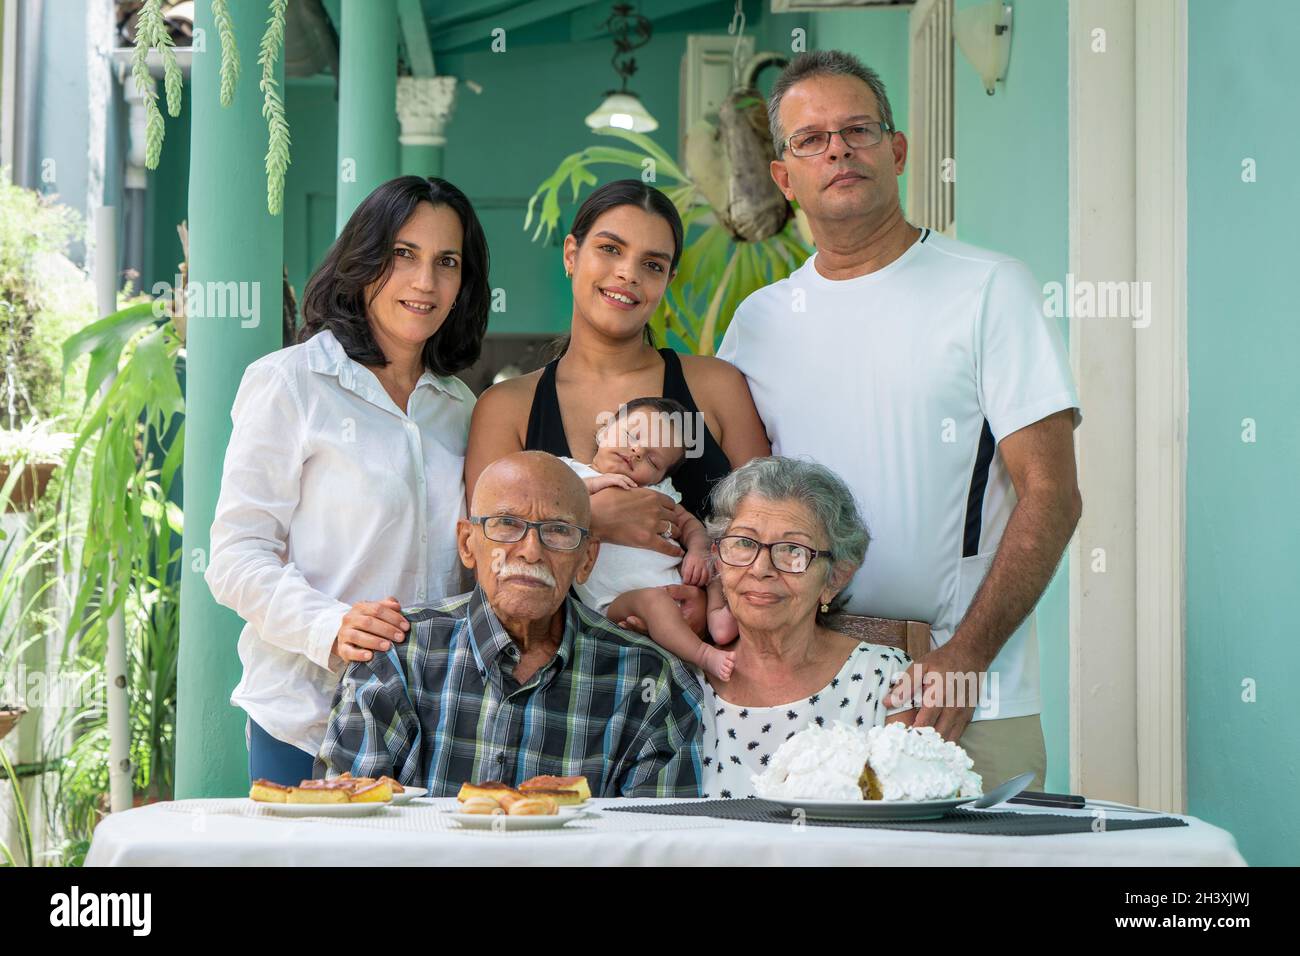 Family photo, grandparents, son, daughter-in-law, granddaughter and great-grandson Stock Photo